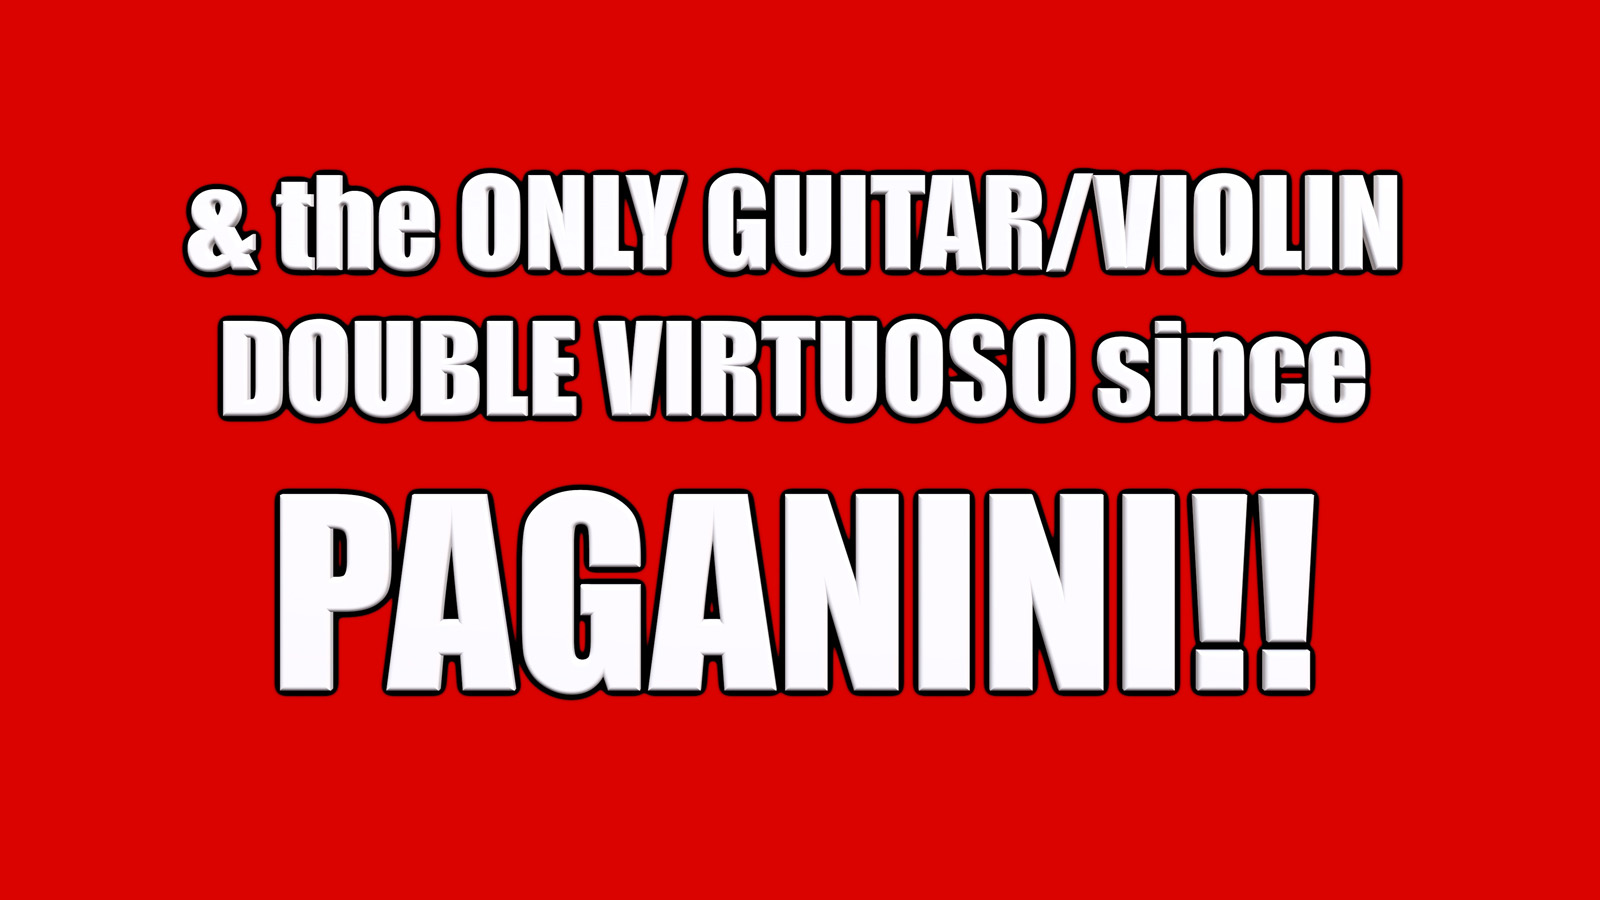 The ONLY GUITAR/VIOLIN DLUBLE VIRTUOSO since PAGANINI!!